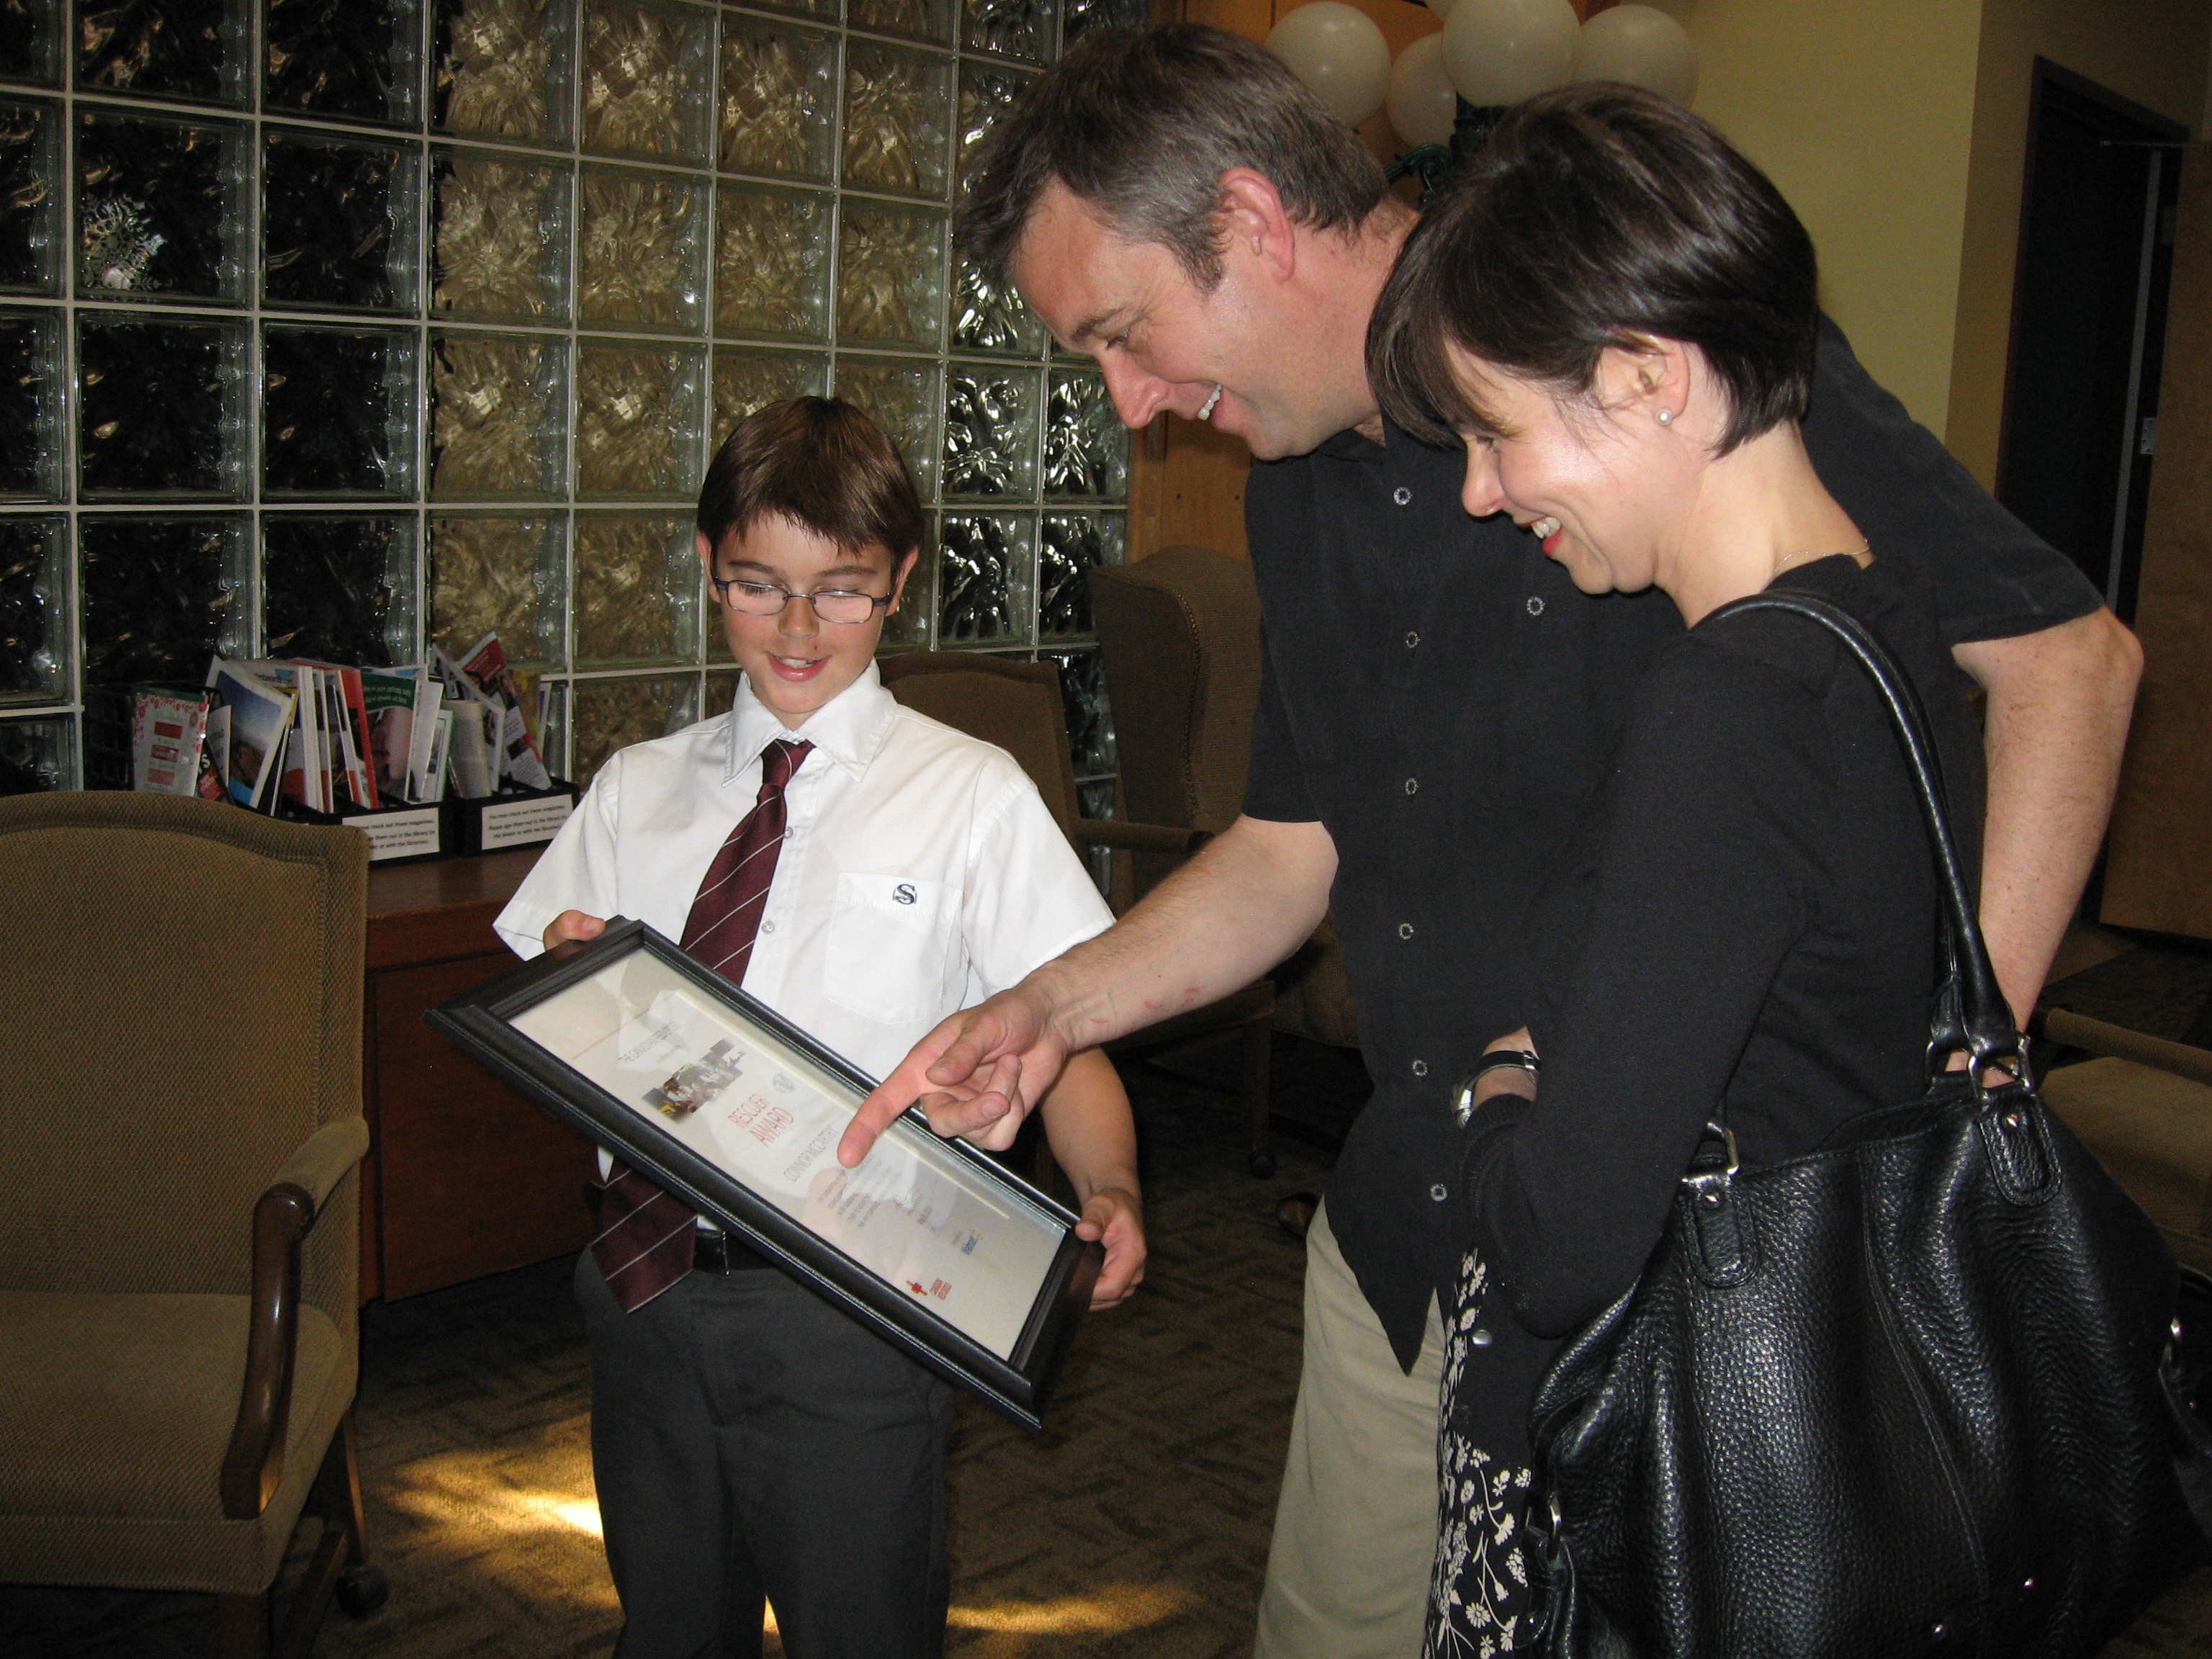 Connor and his parents Ian and Jane admire their son's Rescuer Award.